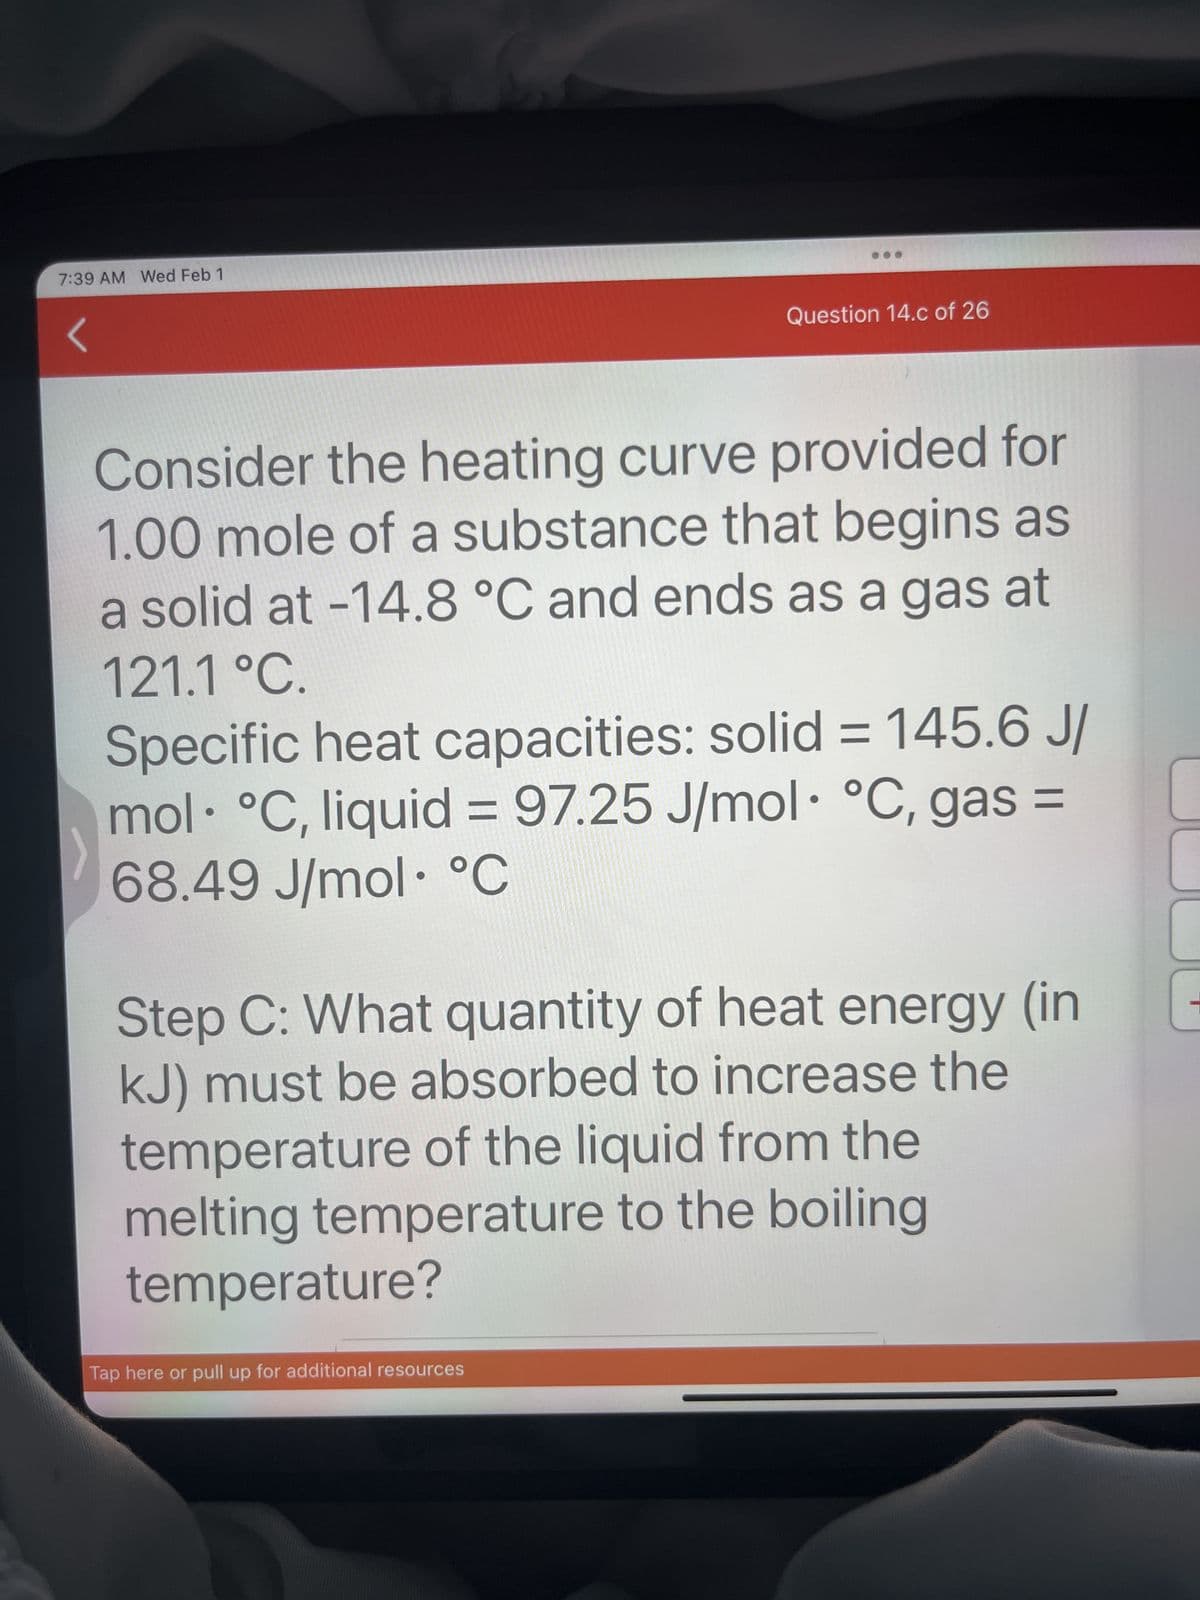 7:39 AM Wed Feb 1
S
Question 14.c of 26
Consider the heating curve provided for
1.00 mole of a substance that begins as
a solid at -14.8 °C and ends as a gas at
121.1 °C.
Specific heat capacities: solid = 145.6 J/
mol °C, liquid = 97.25 J/mol °C, gas =
68.49 J/mol °C
Tap here or pull up for additional resources
Step C: What quantity of heat energy (in
kJ) must be absorbed to increase the
temperature of the liquid from the
melting temperature to the boiling
temperature?
-